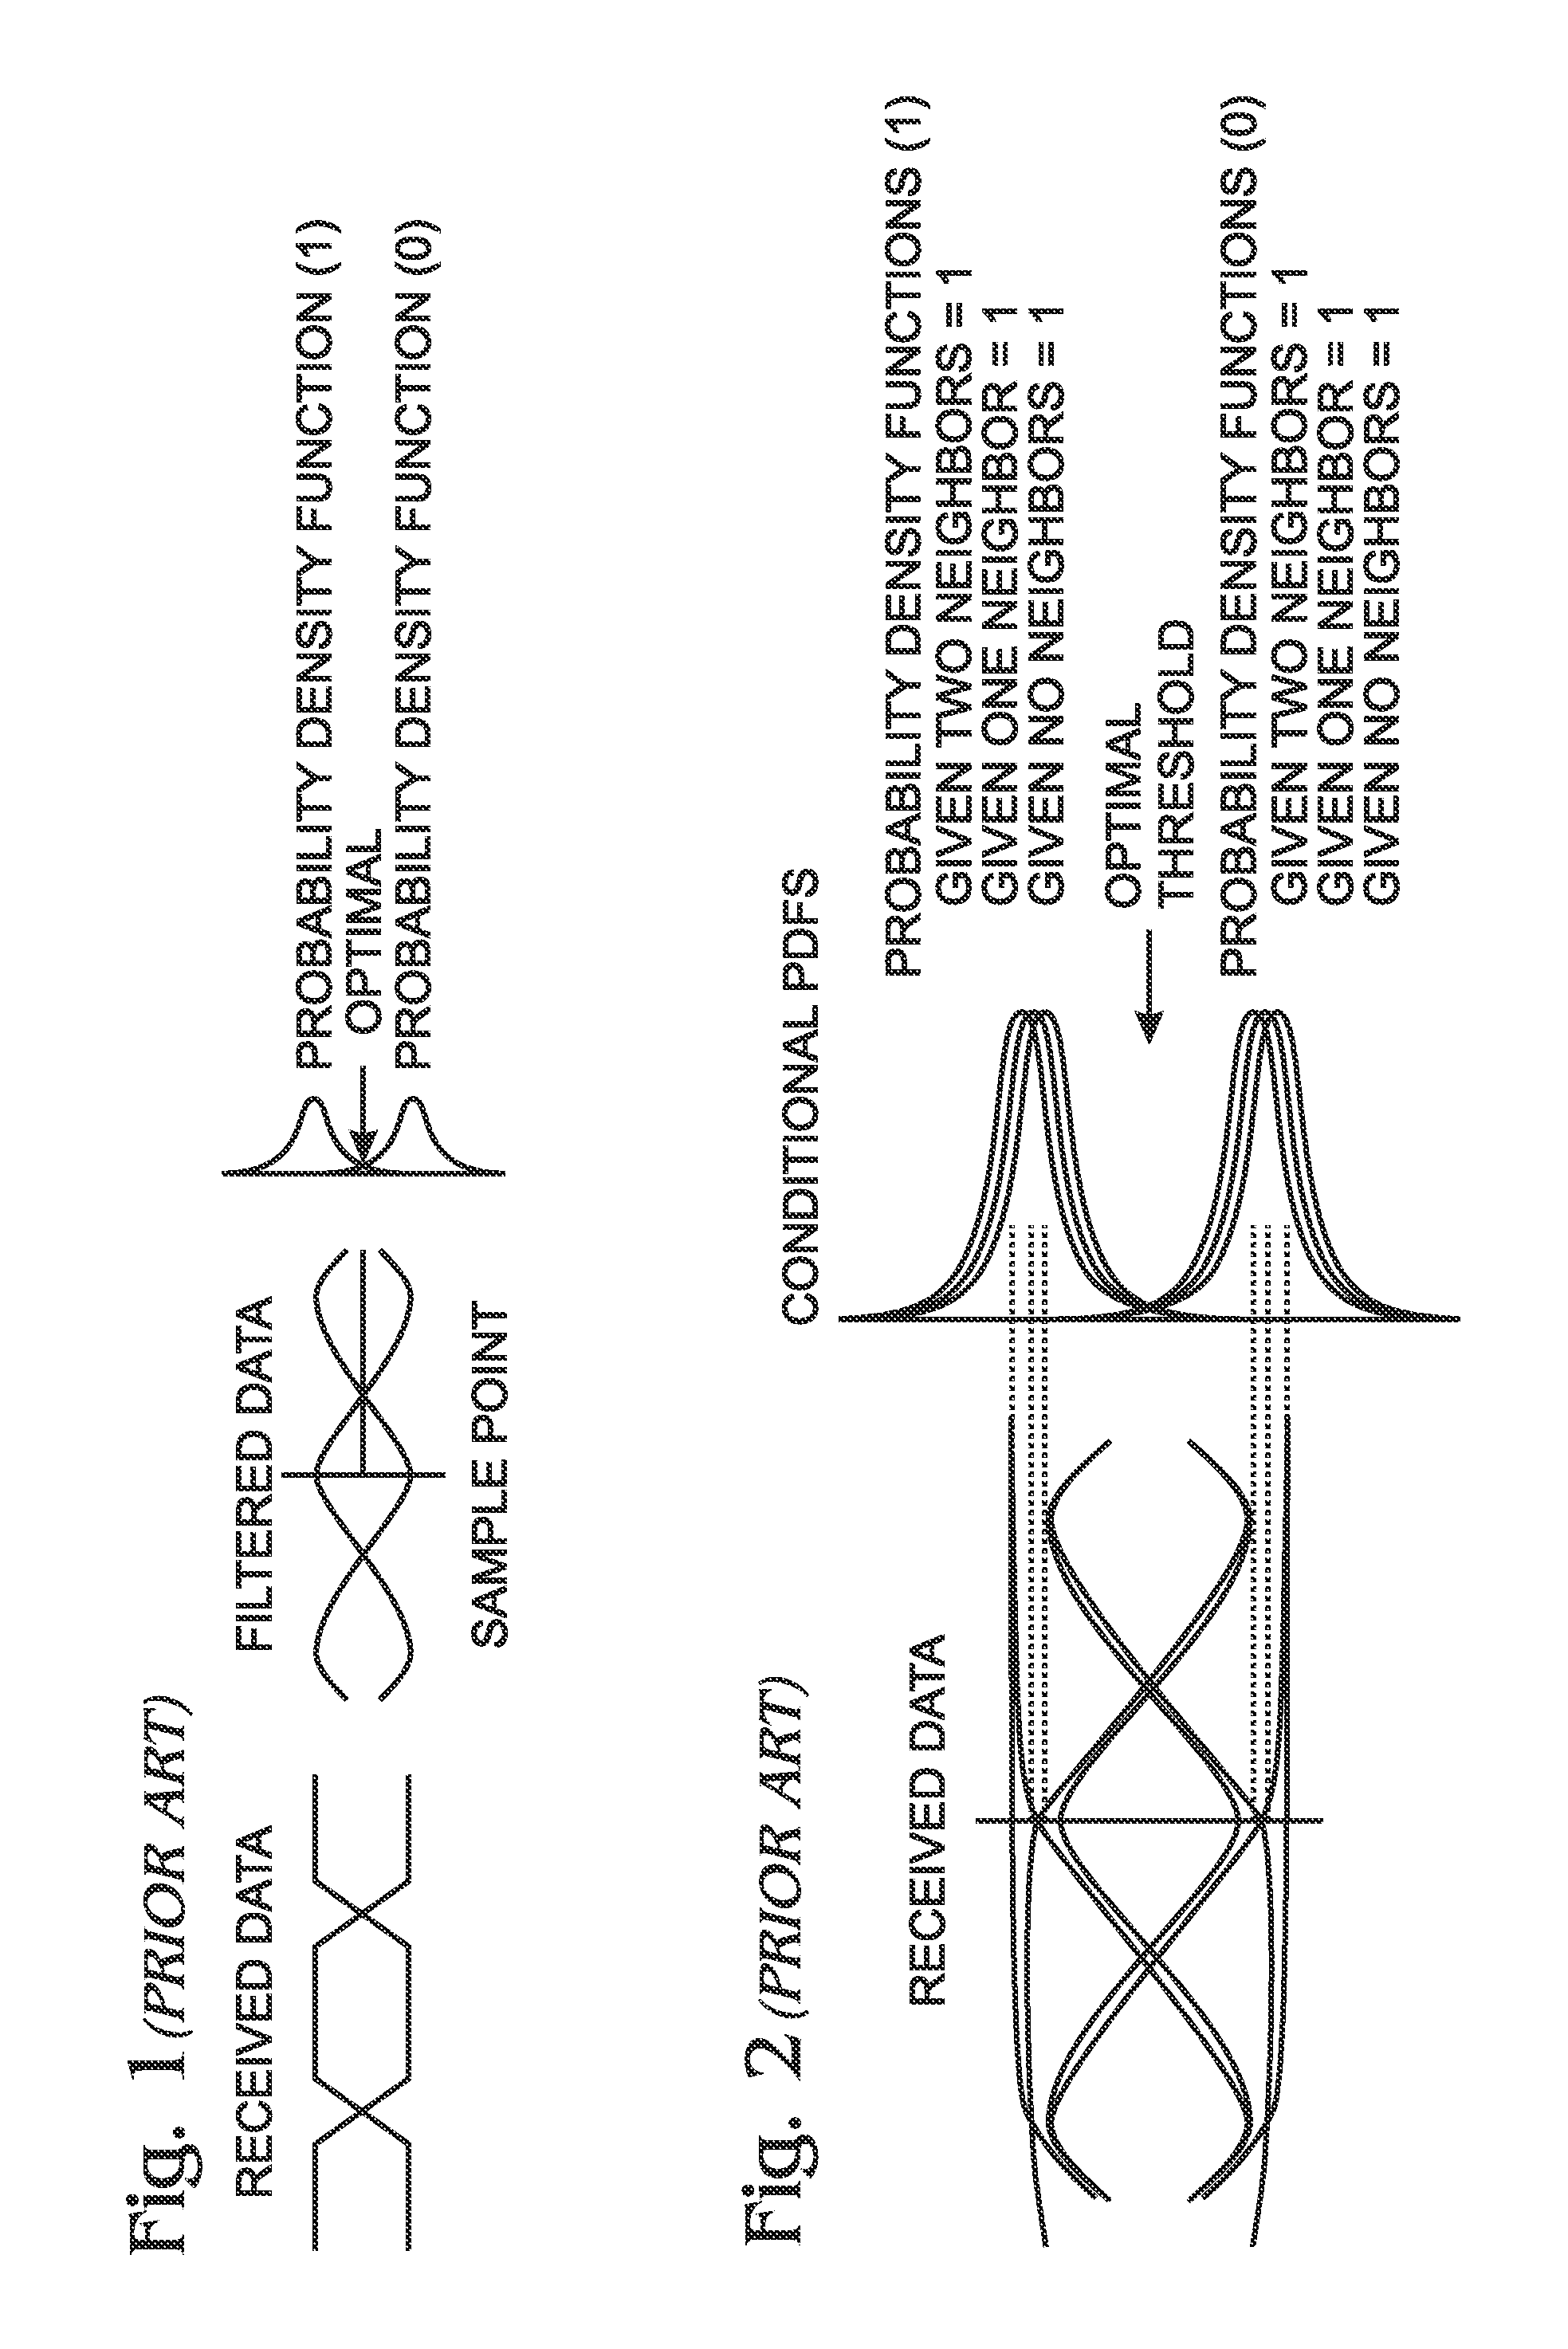 ISI Pattern-Weighted Early-Late Phase Detector with Jitter Correction